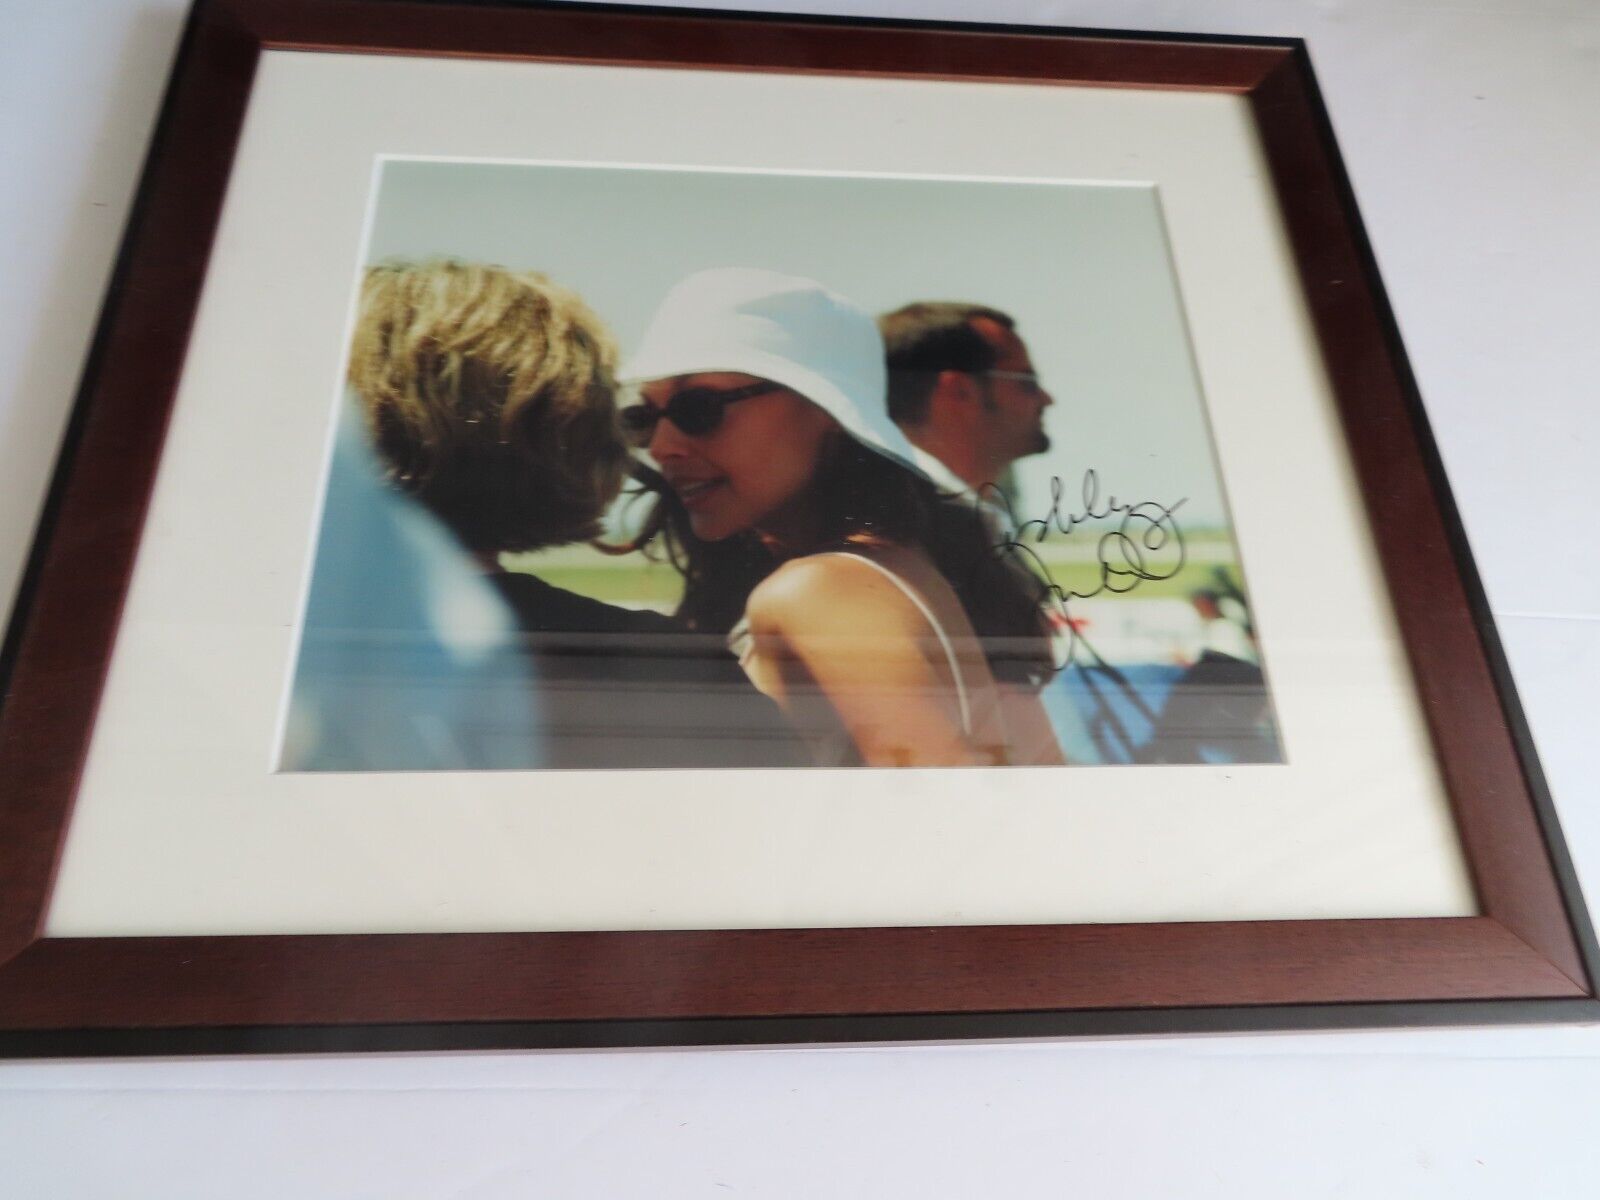 Signed Framed Candid Photo Film Star Ashley Judd Taken At An Auto Racing Event